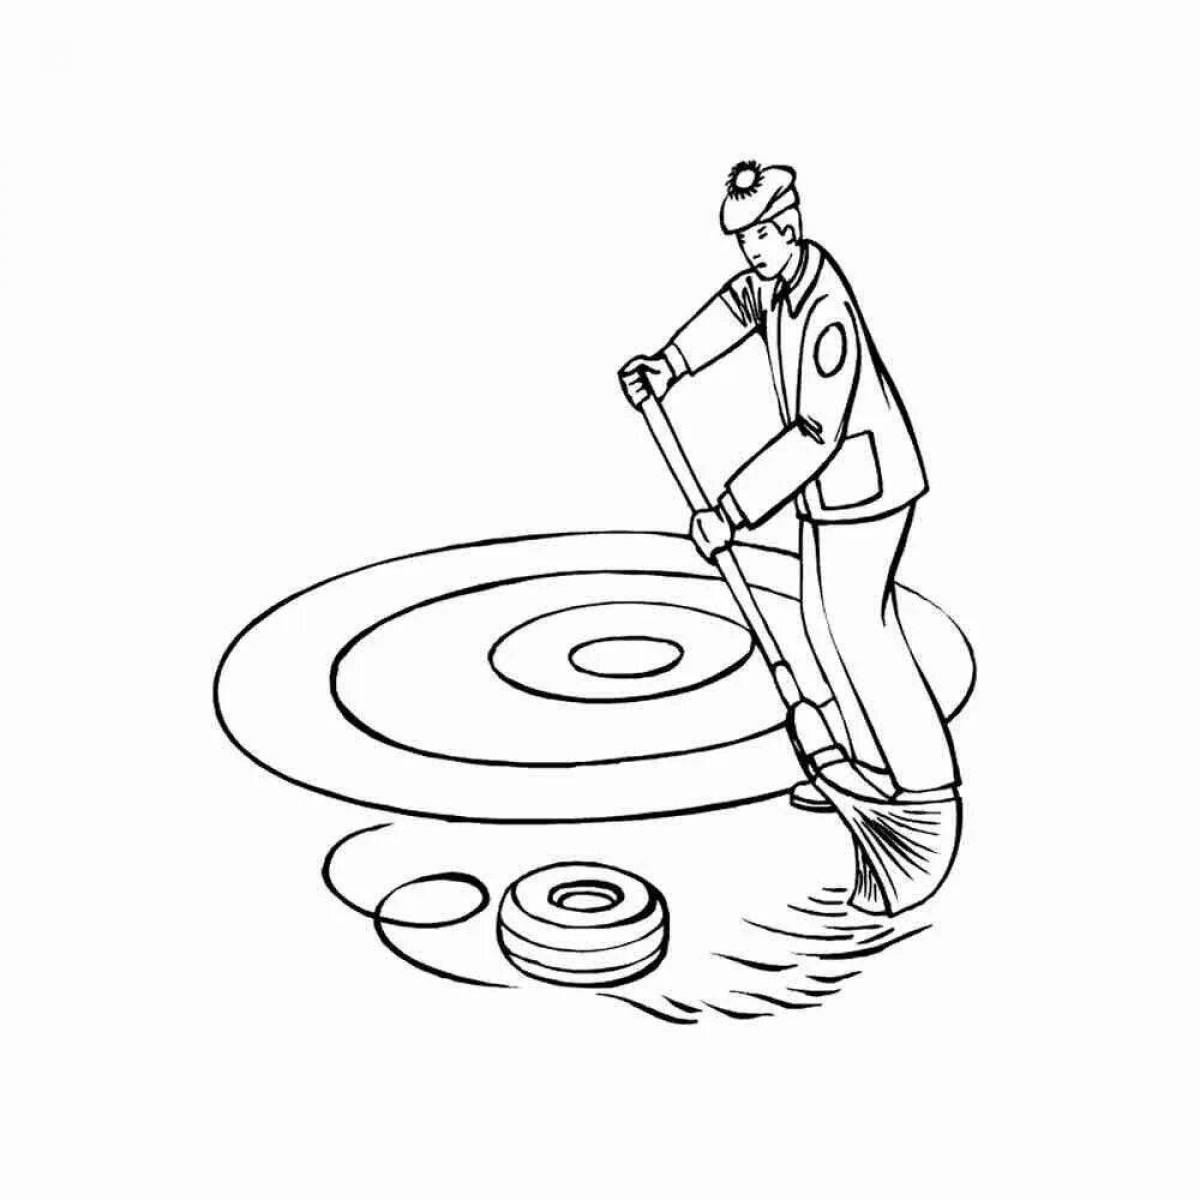 Luxury curling coloring page